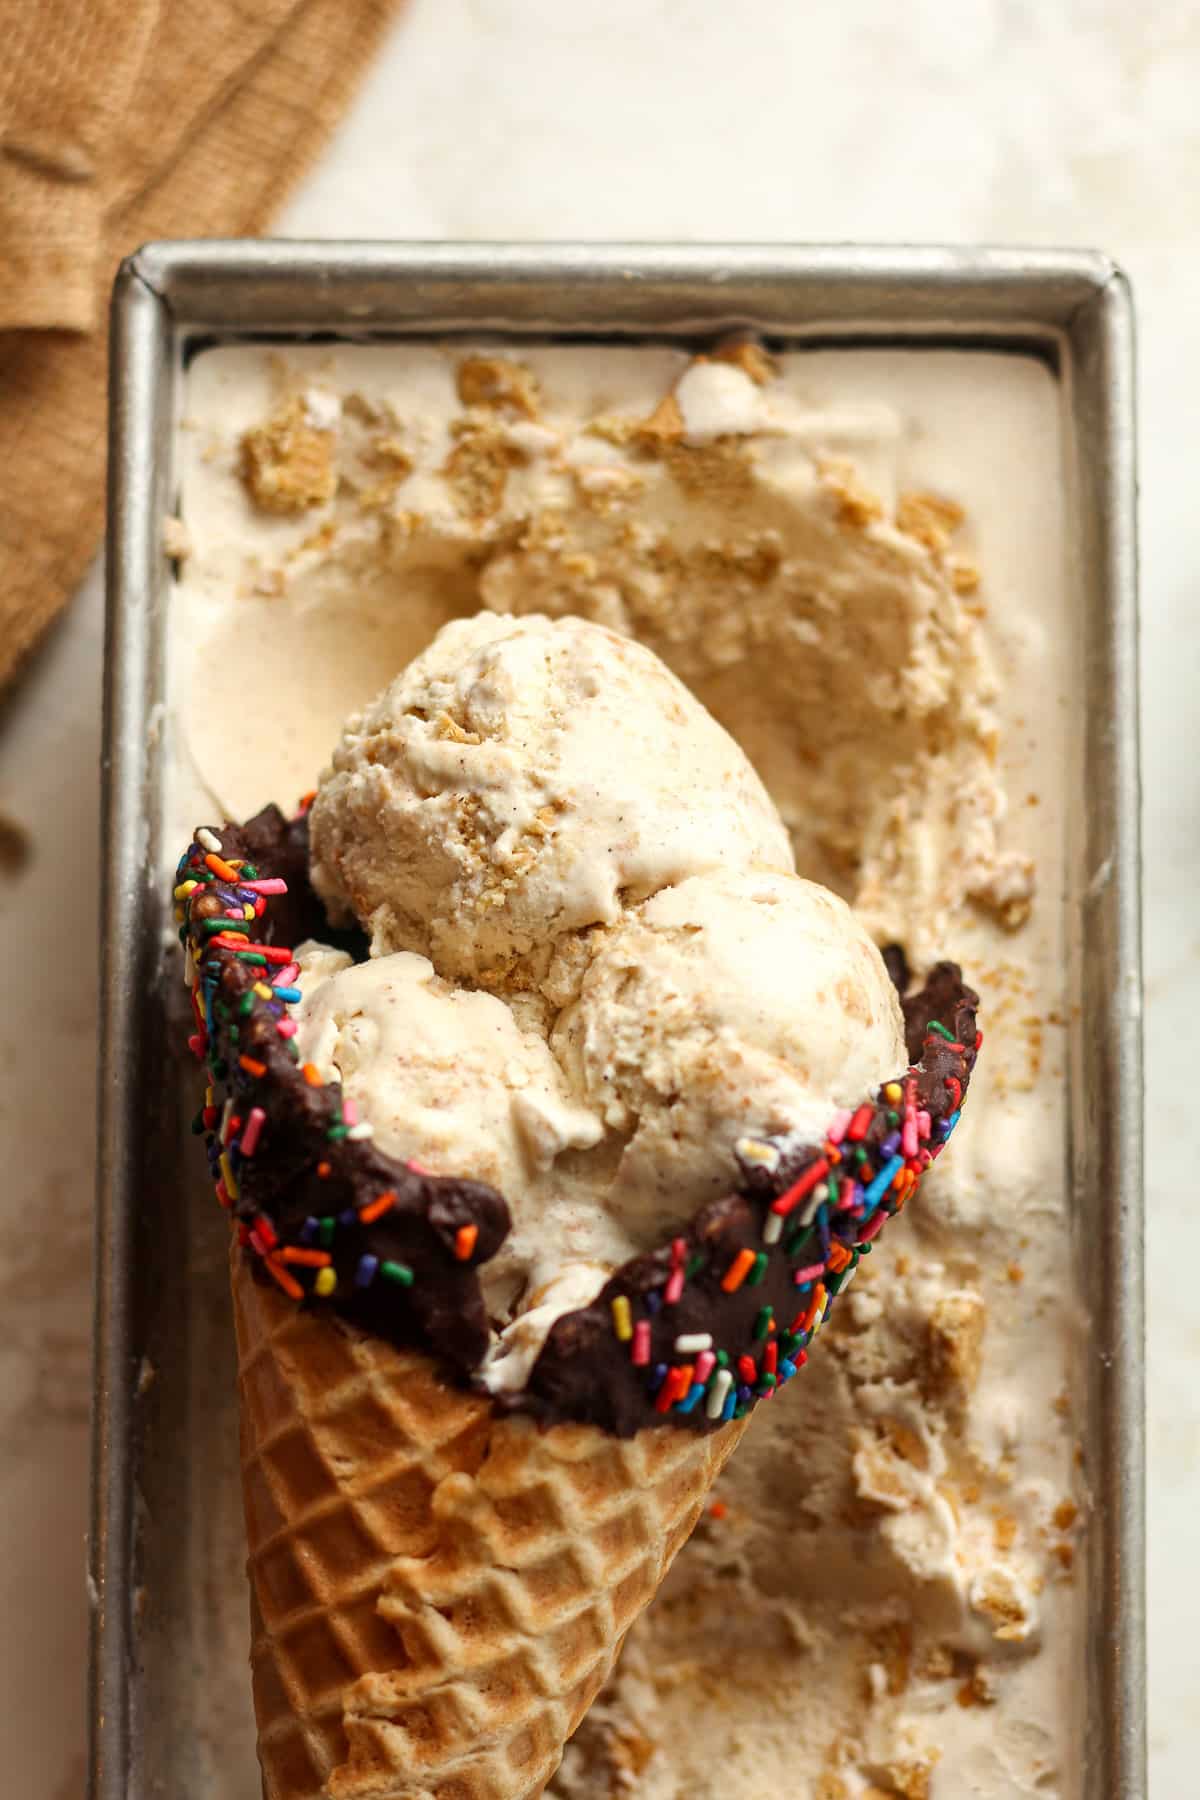 Closeup on a pan of a waffle cone of cinnamon ice cream in a loaf pan of ice cream.